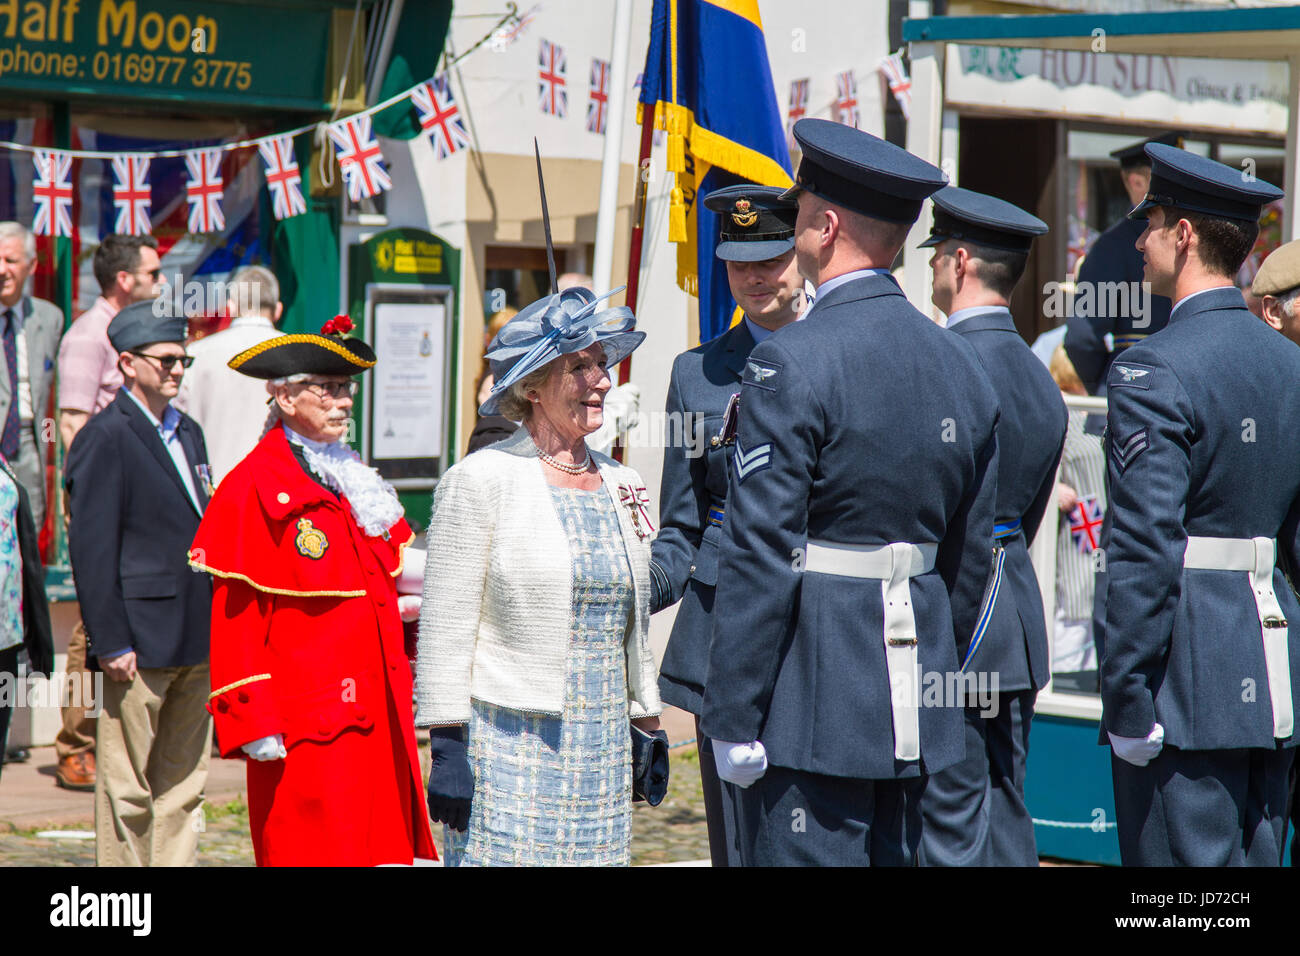 Brampton, UK. 18th June, 2017. RAF Spadeadam received the Freedom of Brampton on Jun 18 2017. The Lord Lieutenant of Cumbria, Claire Hensman and Station Commander Wing Commander Ruari Henderson-Begg, inspect the troops at the ceremony Credit: Andrew Cheal/Alamy Live News Stock Photo